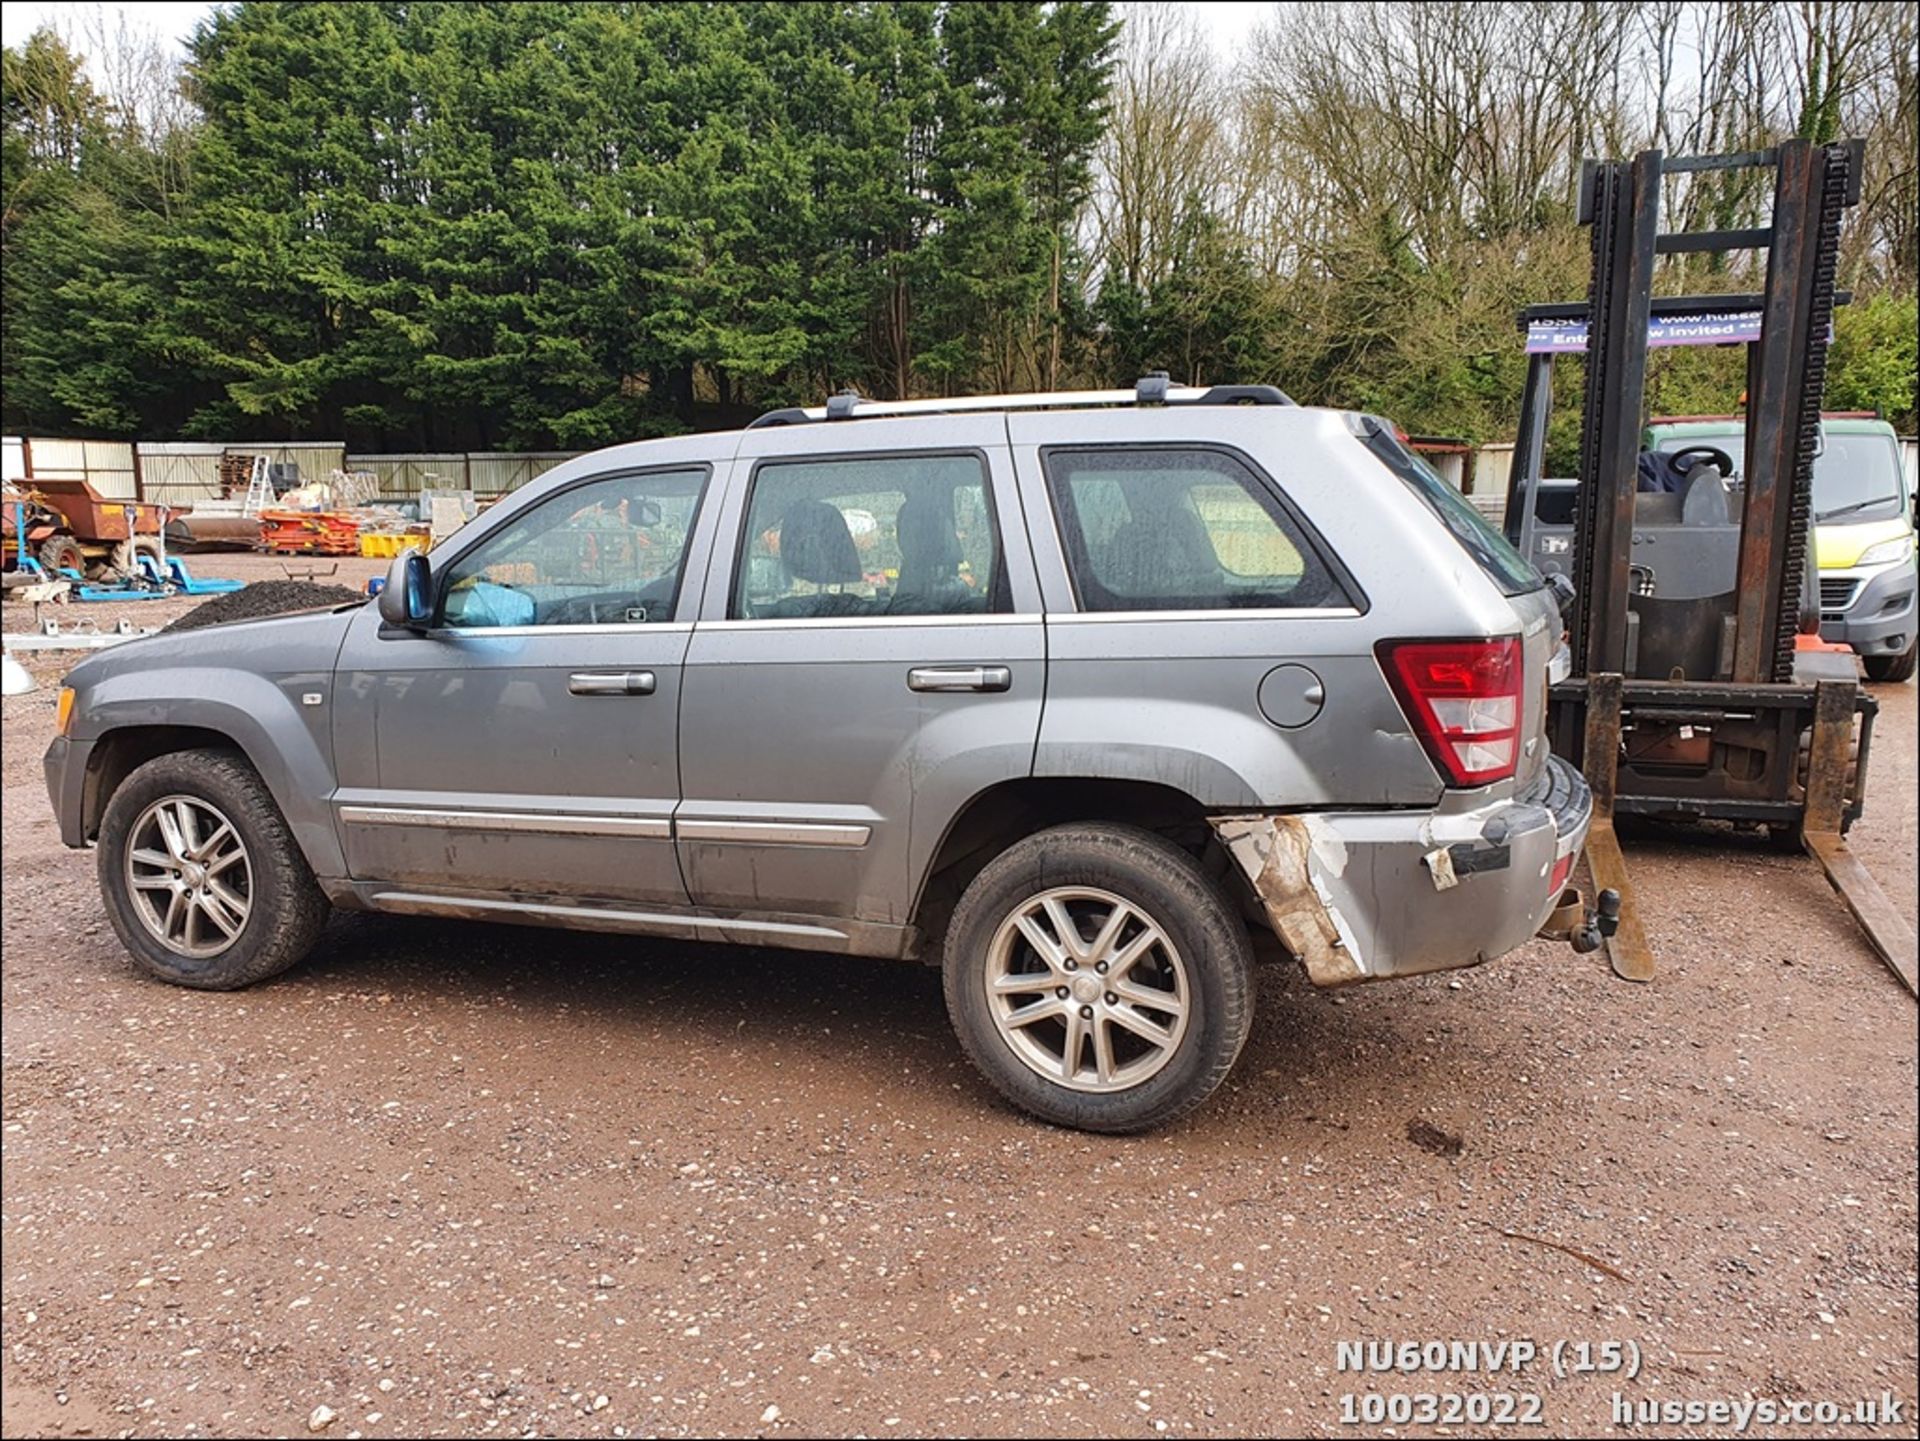 10/60 JEEP G-CHEROKEE OVERLAND CRD A - 2987cc 5dr Estate (Grey, 154k) - Image 15 of 47